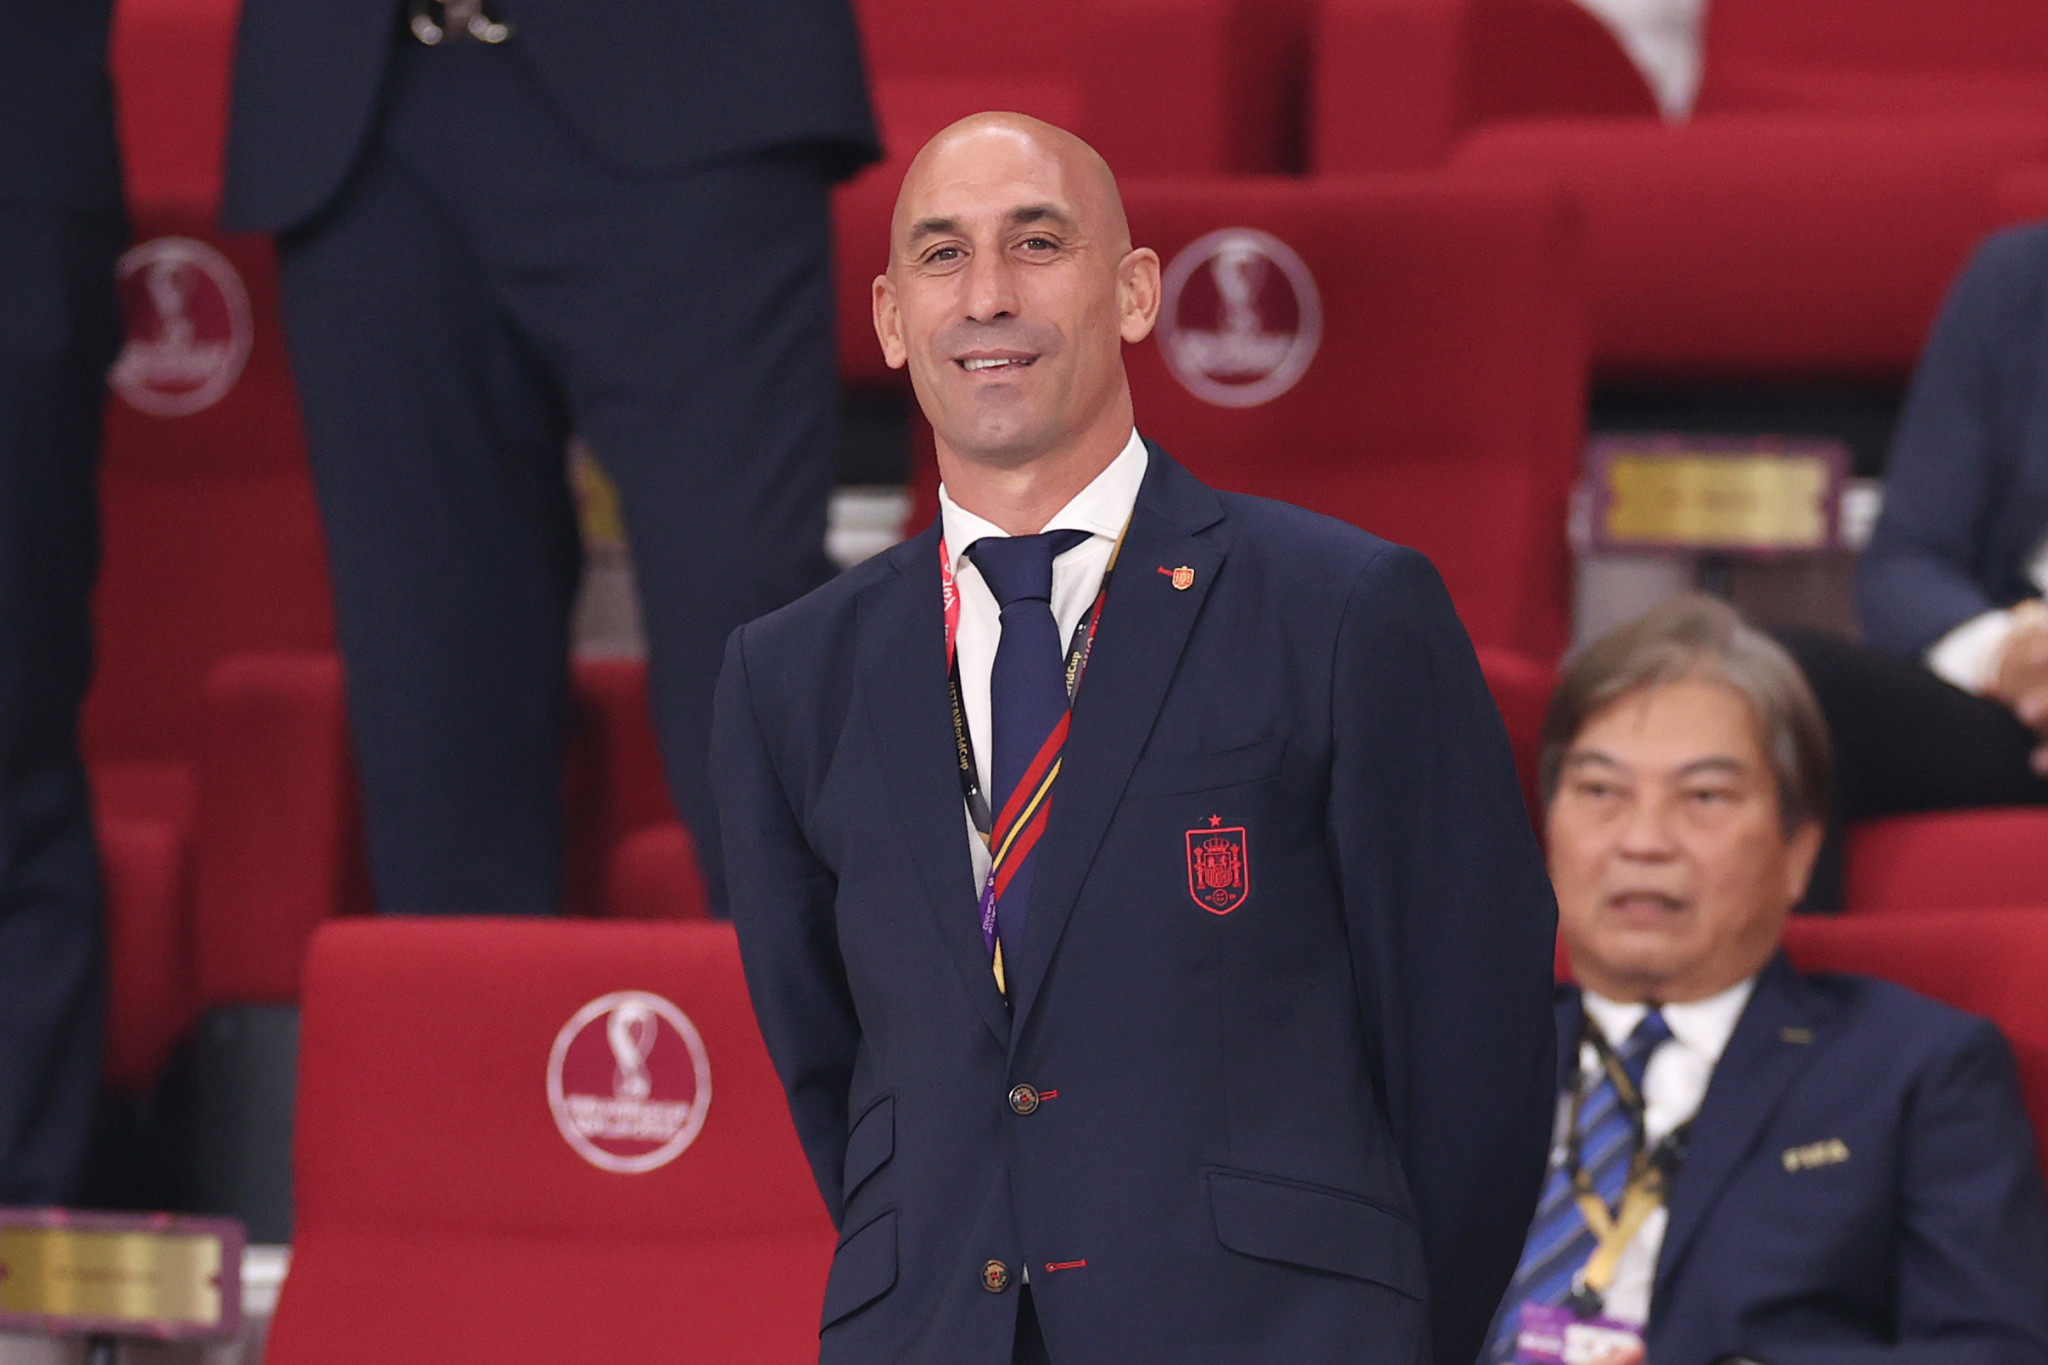 Luis Rubiales is set to be subject to disciplinary proceedings from FIFA ©Getty Images